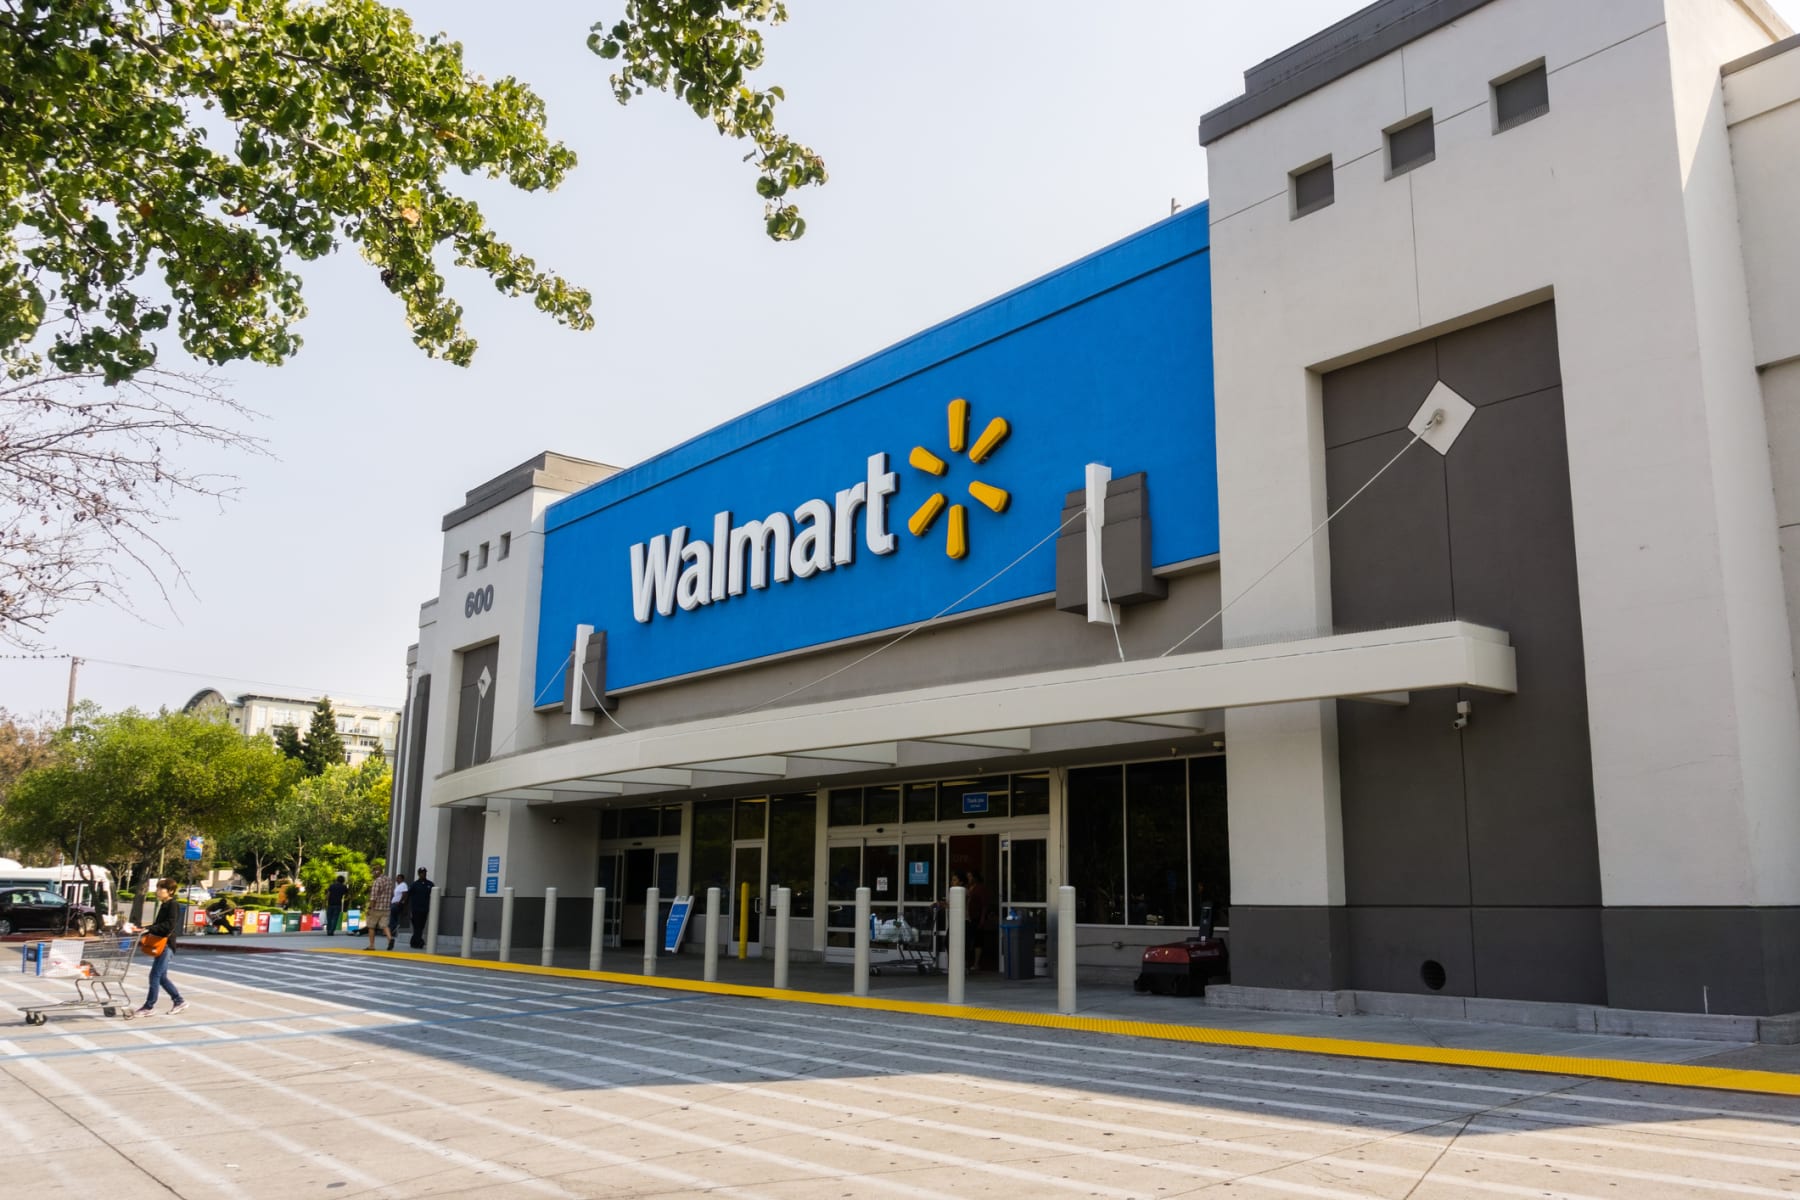 A Walmart store in the daytime